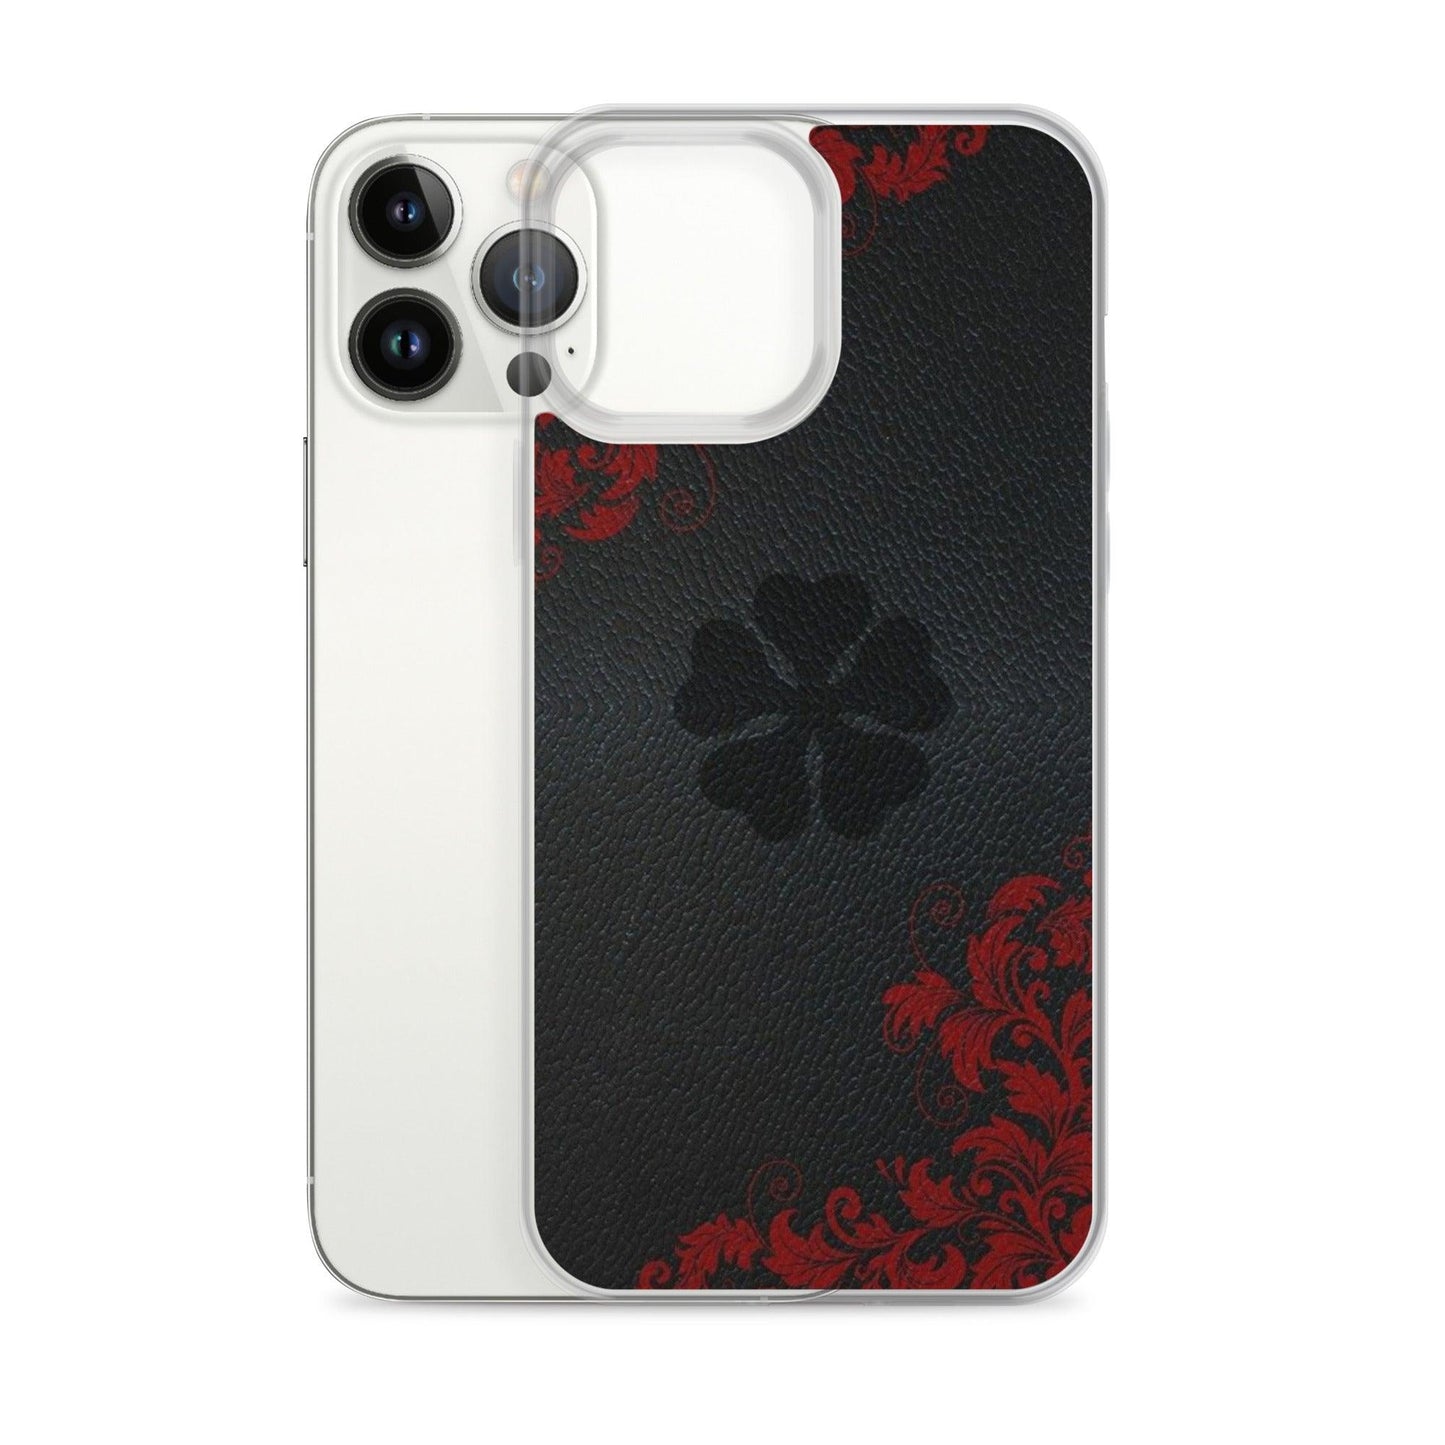 Asta's Grimoire Clear Case for iPhone® - Rexpect Nerd